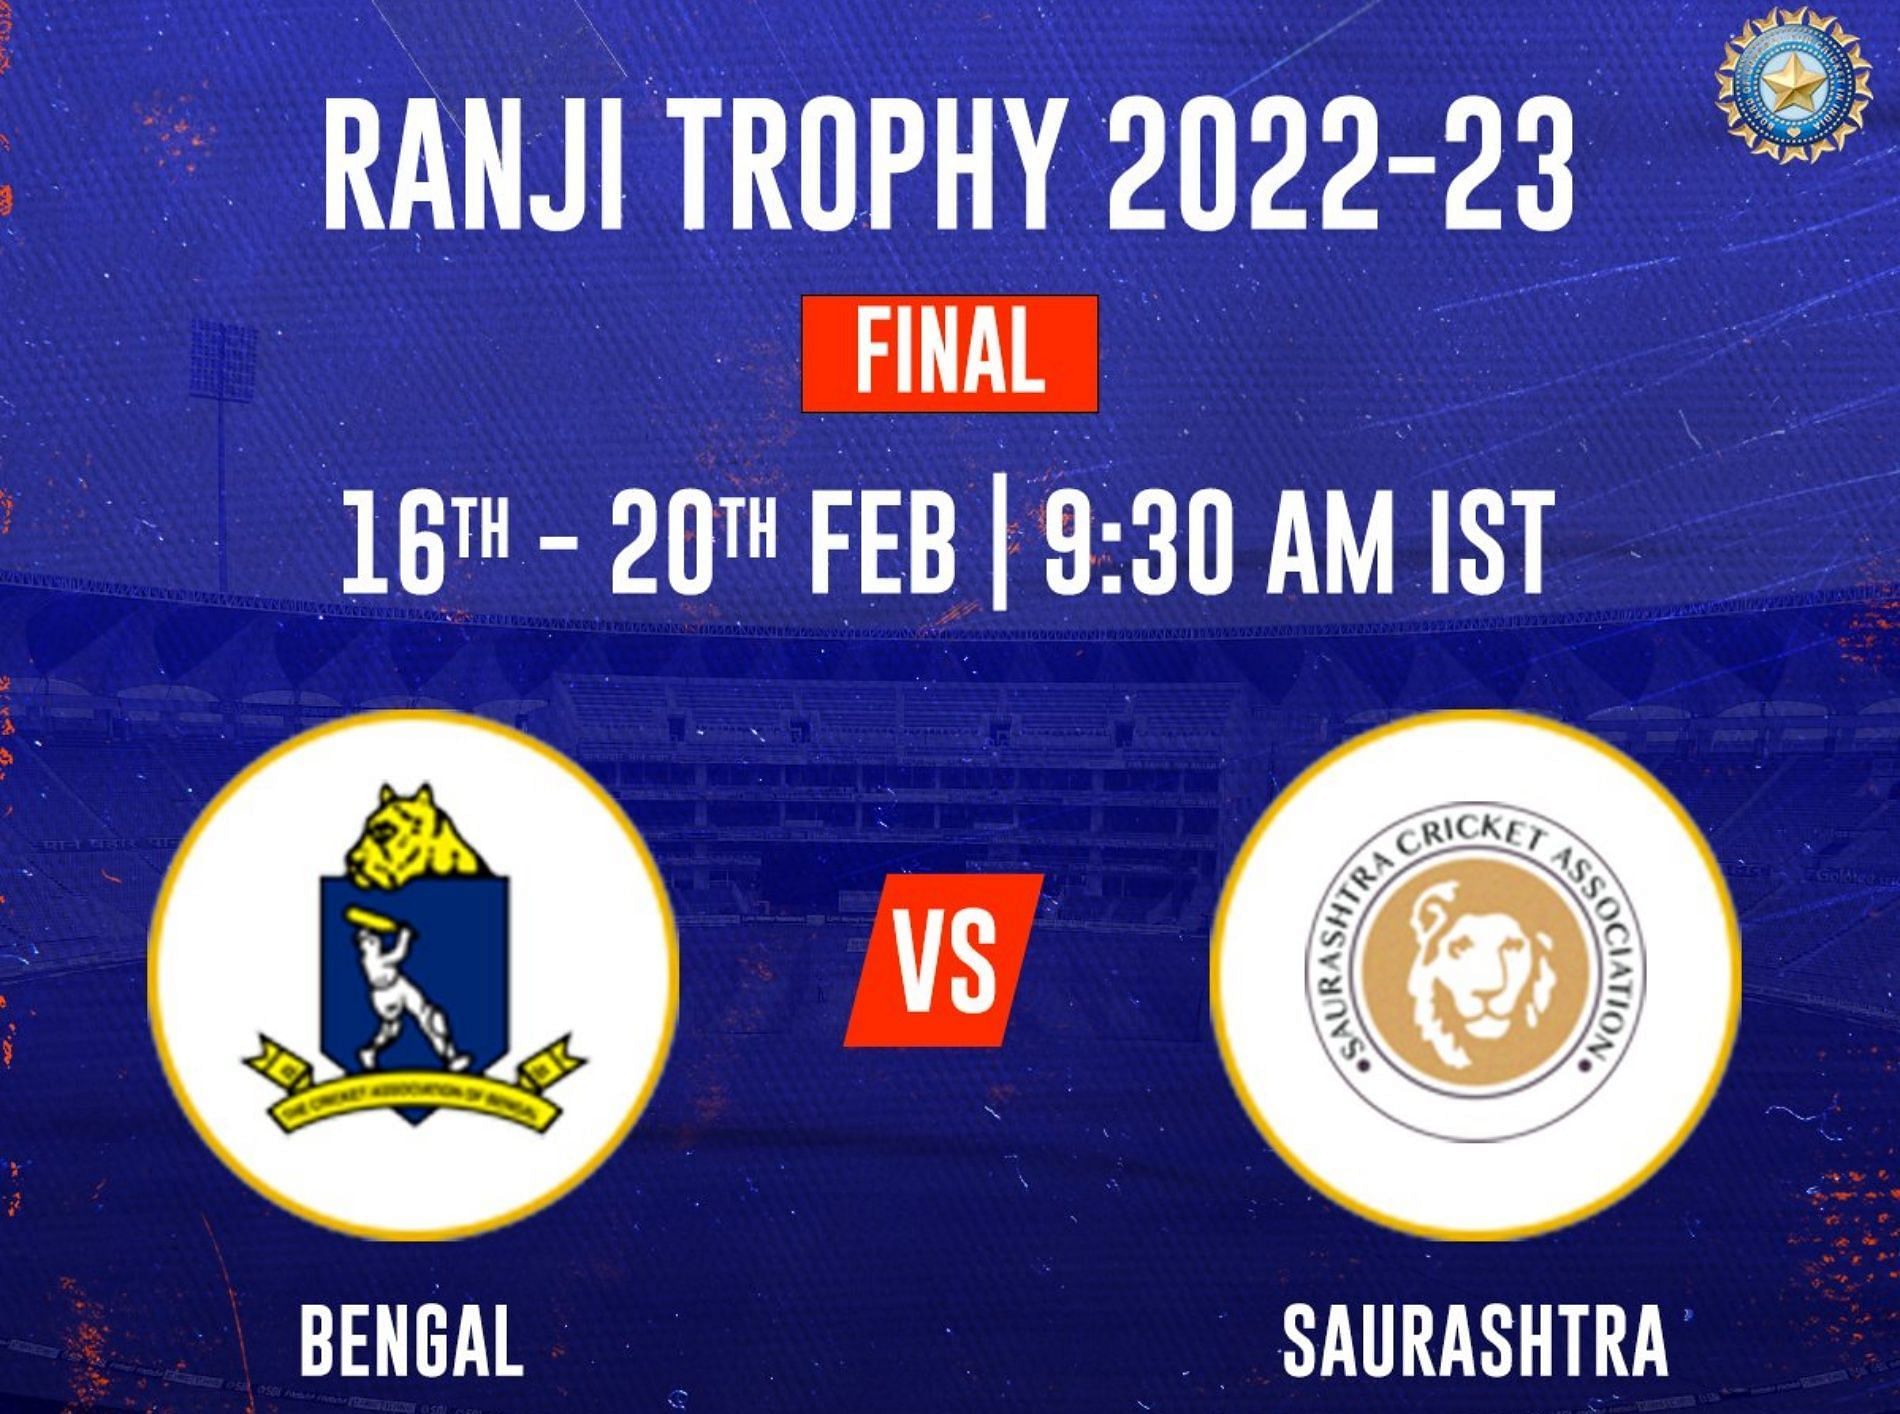 BEN vs SAU Ranji Trophy 2022-23 final Telecast Channel Where to watch and live streaming details in India